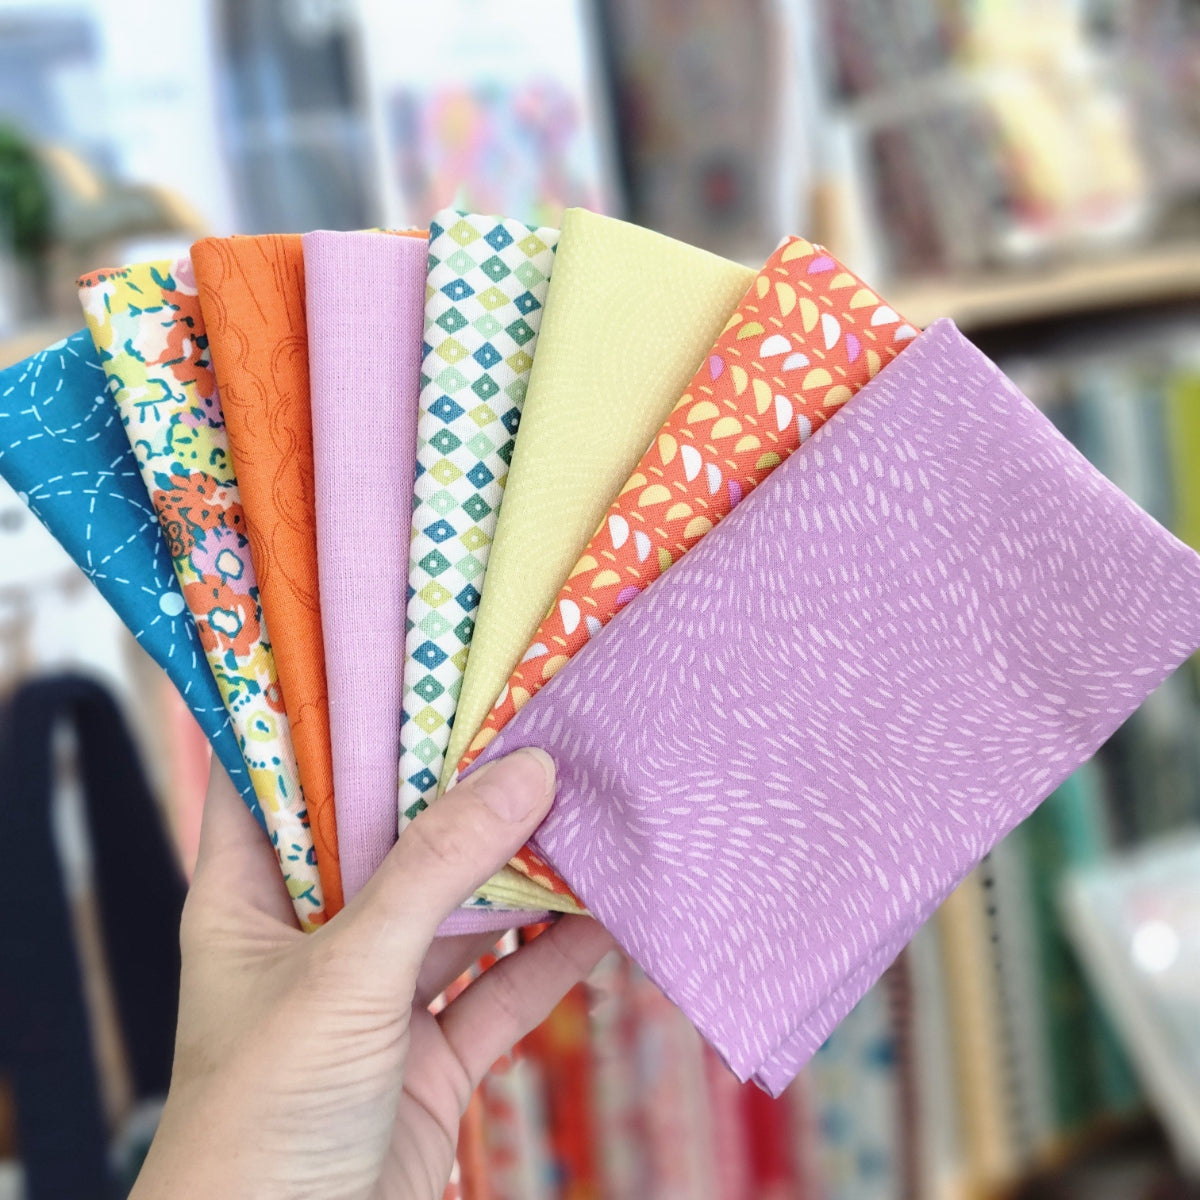 The Jen - Out of Hand Shop Curated Fat Quarter Bundle - Inspired by Jen Kingwell